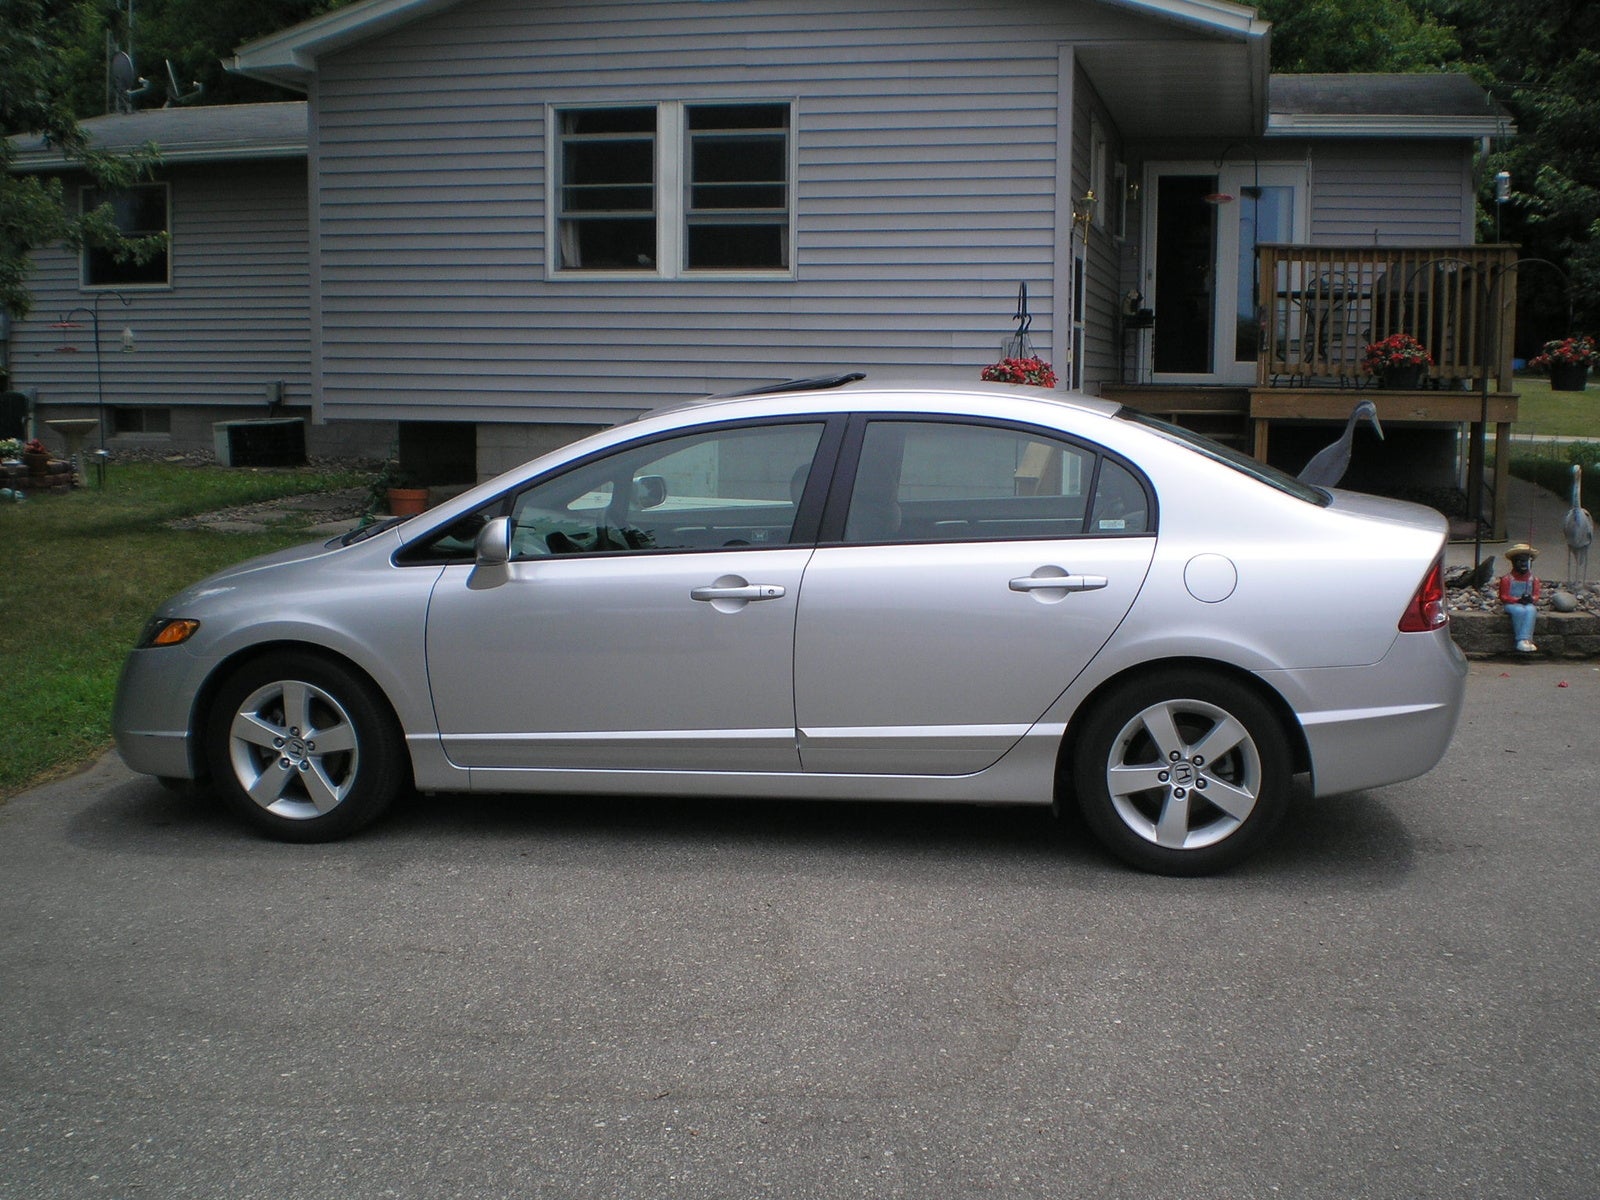 2006 Honda Civic Coupe on 2006 Honda Civic Ex   Other Pictures   2006 Honda Civic Ex Picture